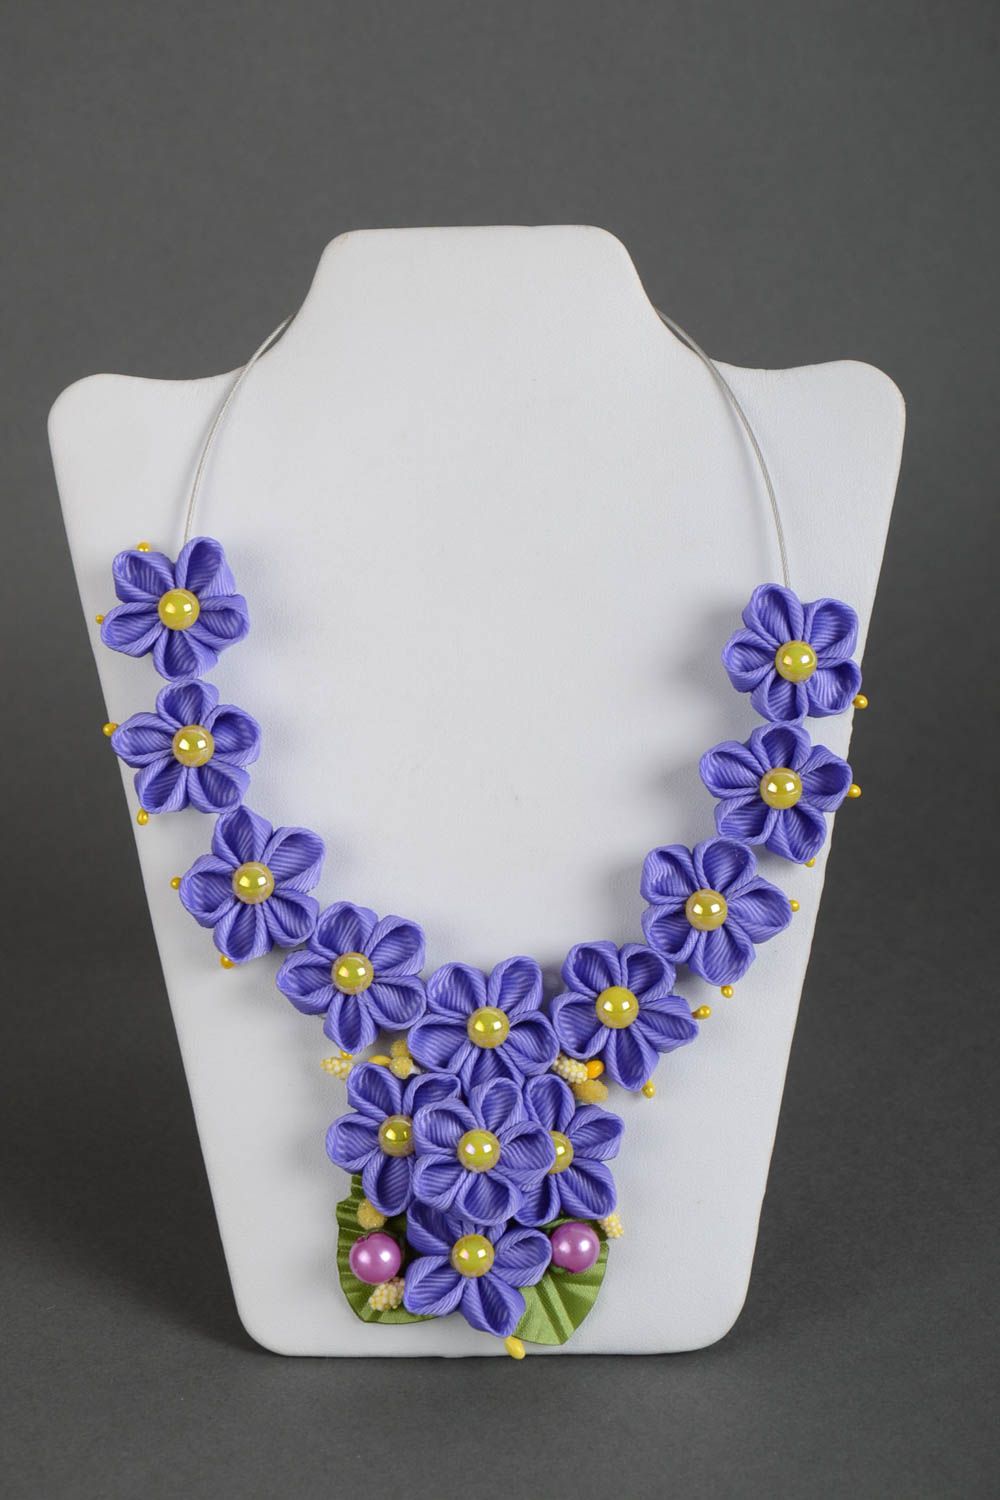 Handmade designer necklace with violet rep ribbon kanzashi flowers and beads photo 2